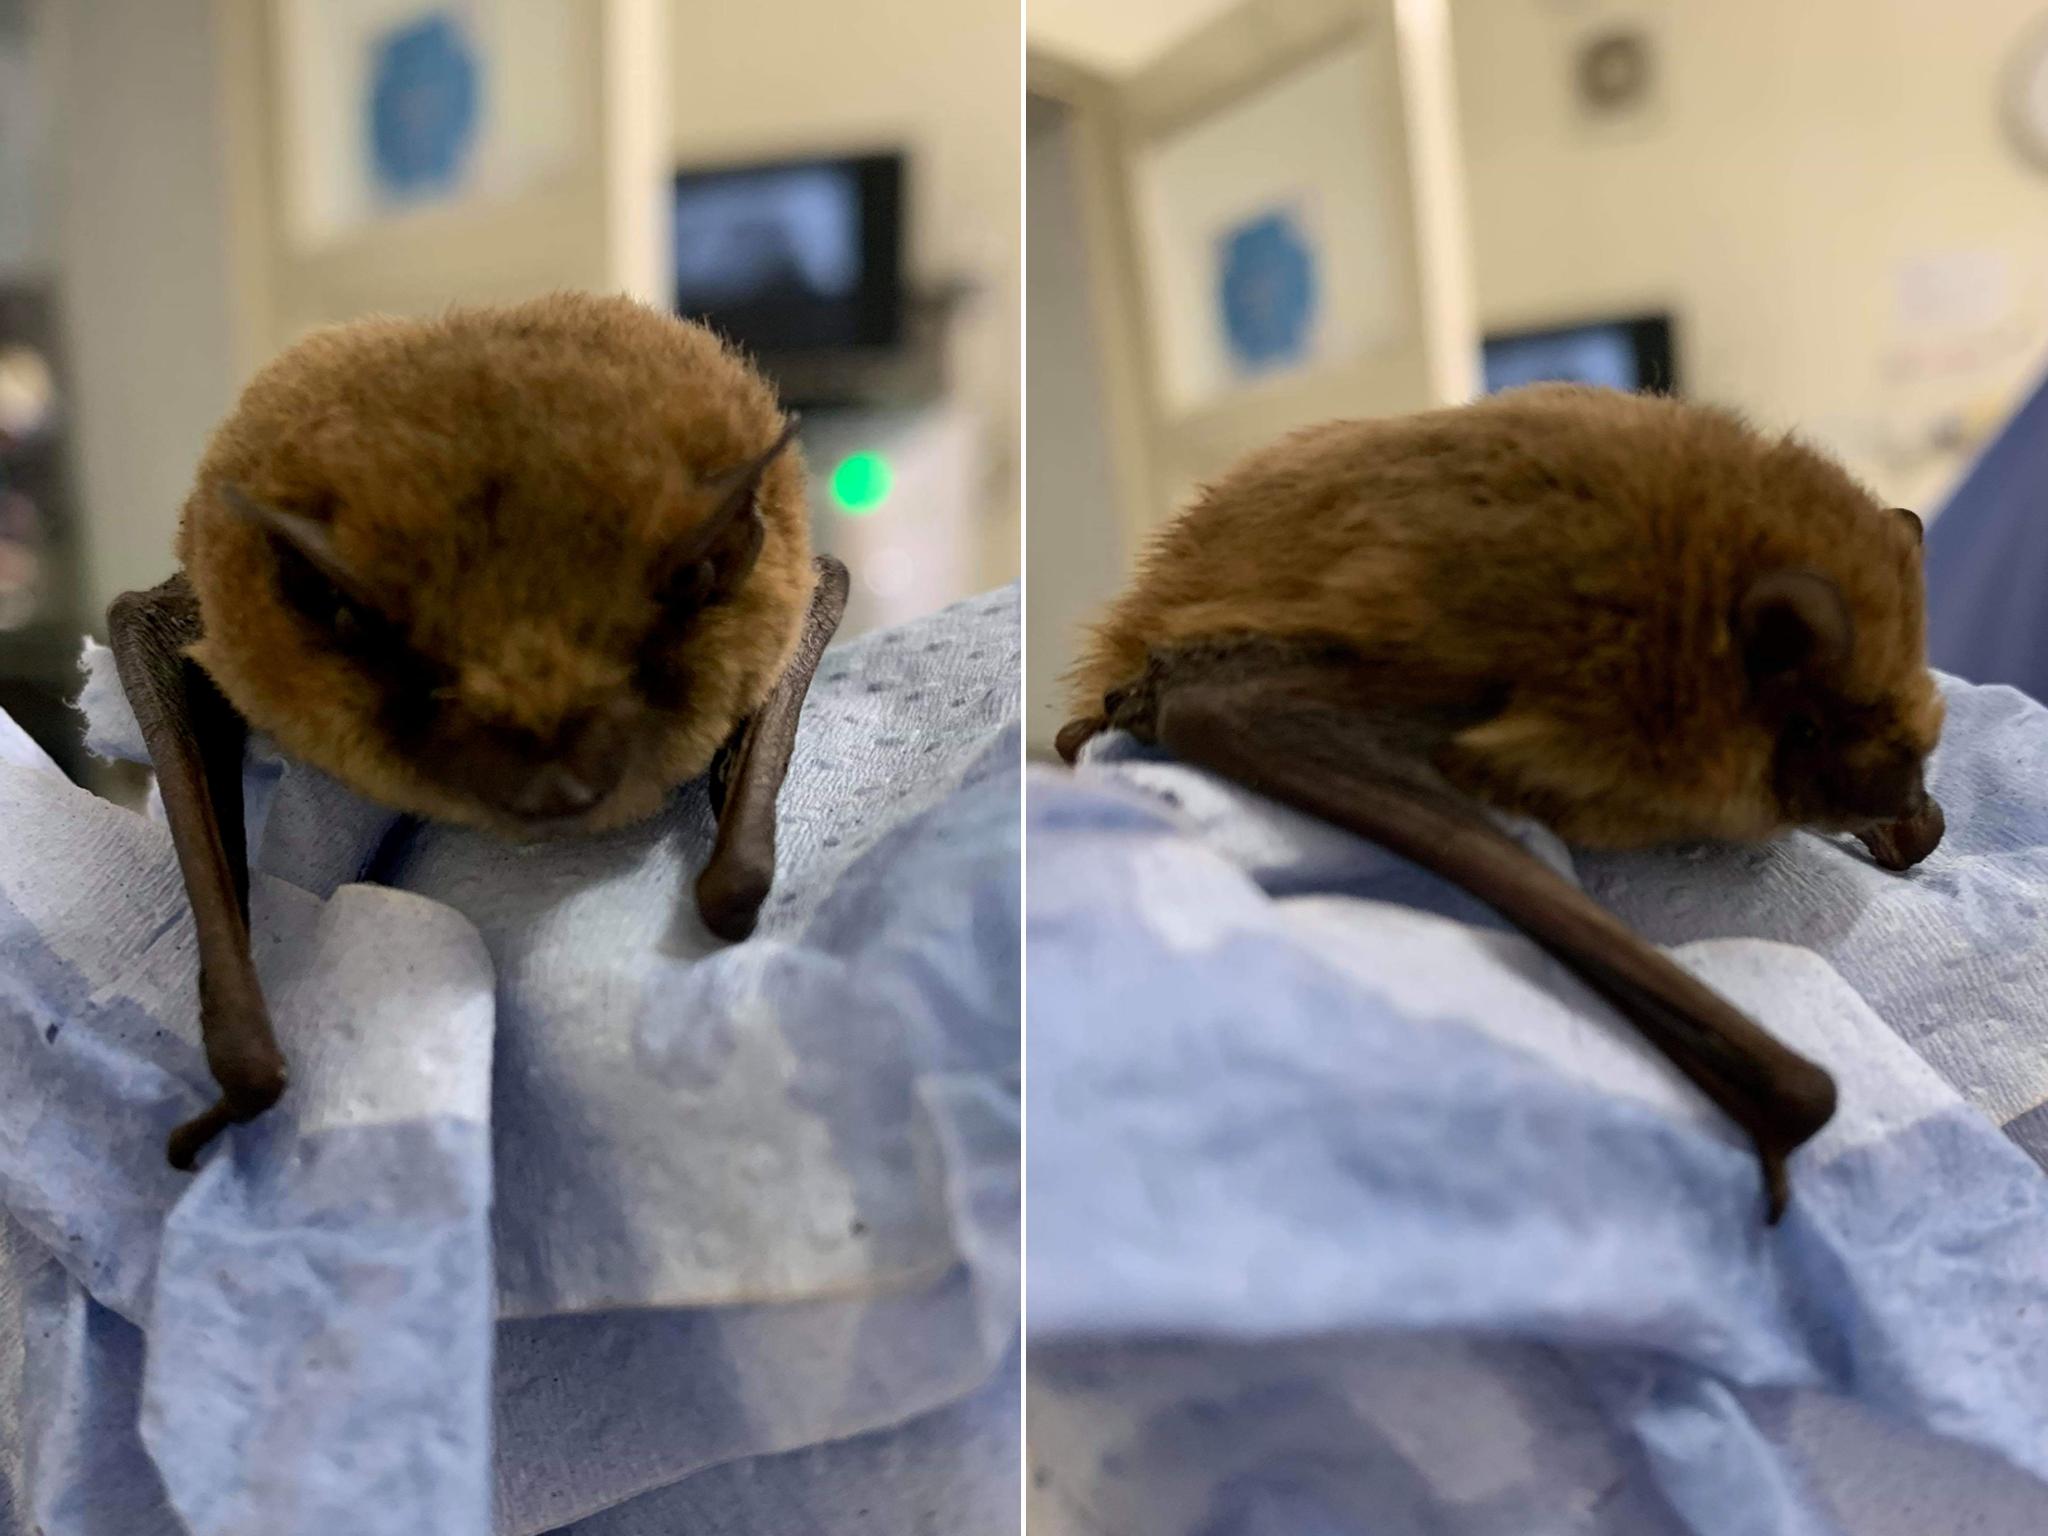 A bat has been found in a car boot of a vehicle that travelled to the UK from France